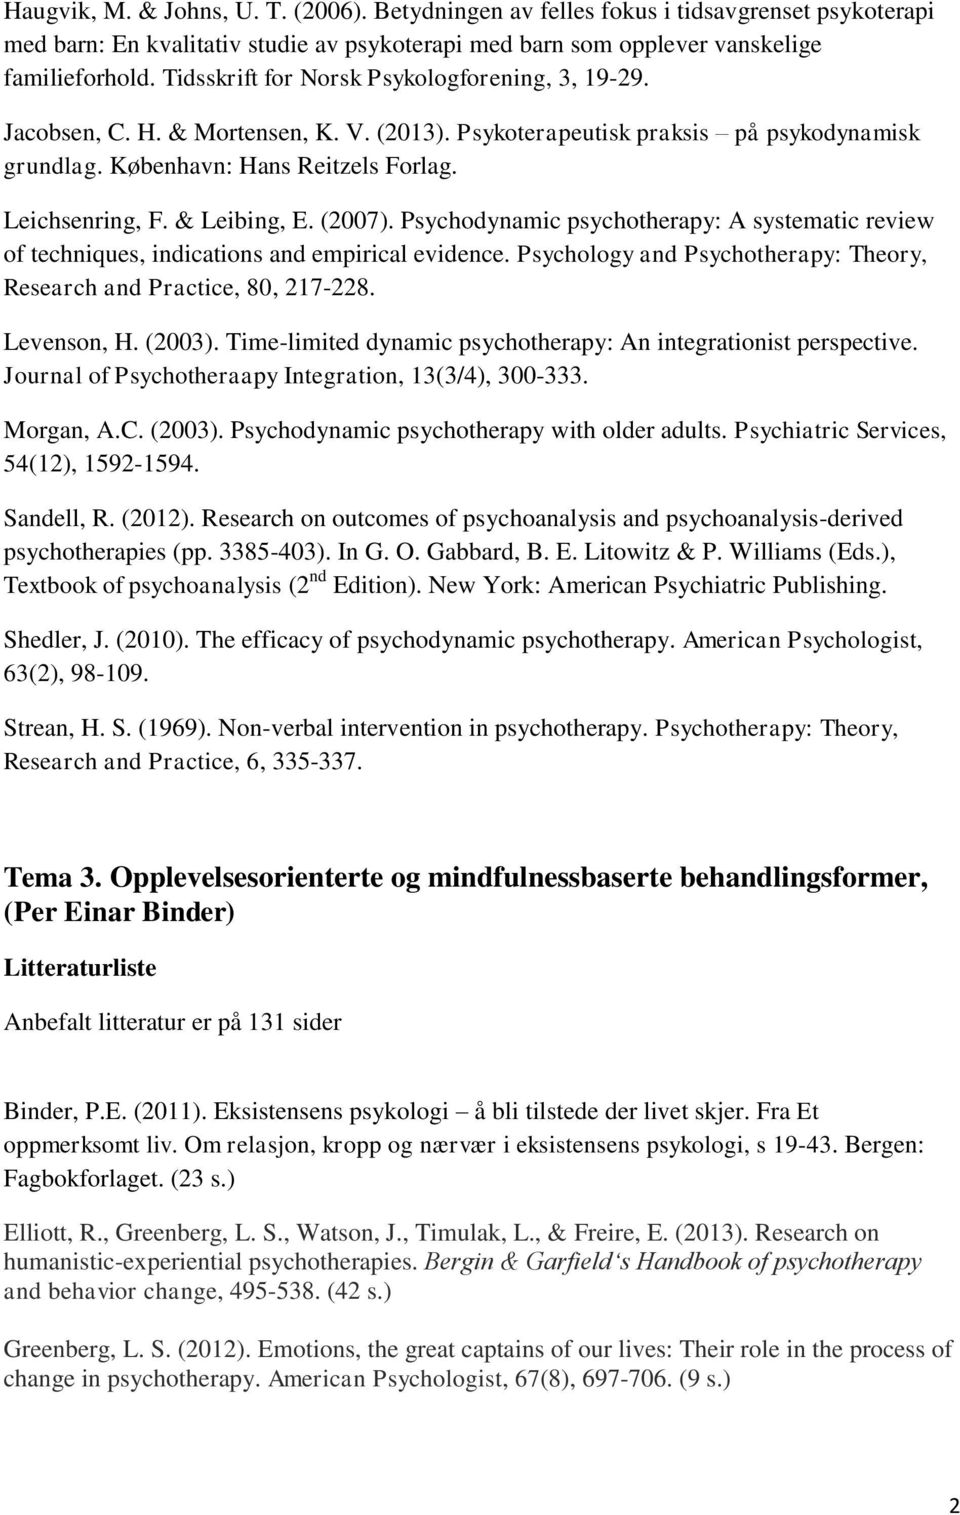 & Leibing, E. (2007). Psychodynamic psychotherapy: A systematic review of techniques, indications and empirical evidence. Psychology and Psychotherapy: Theory, Research and Practice, 80, 217-228.